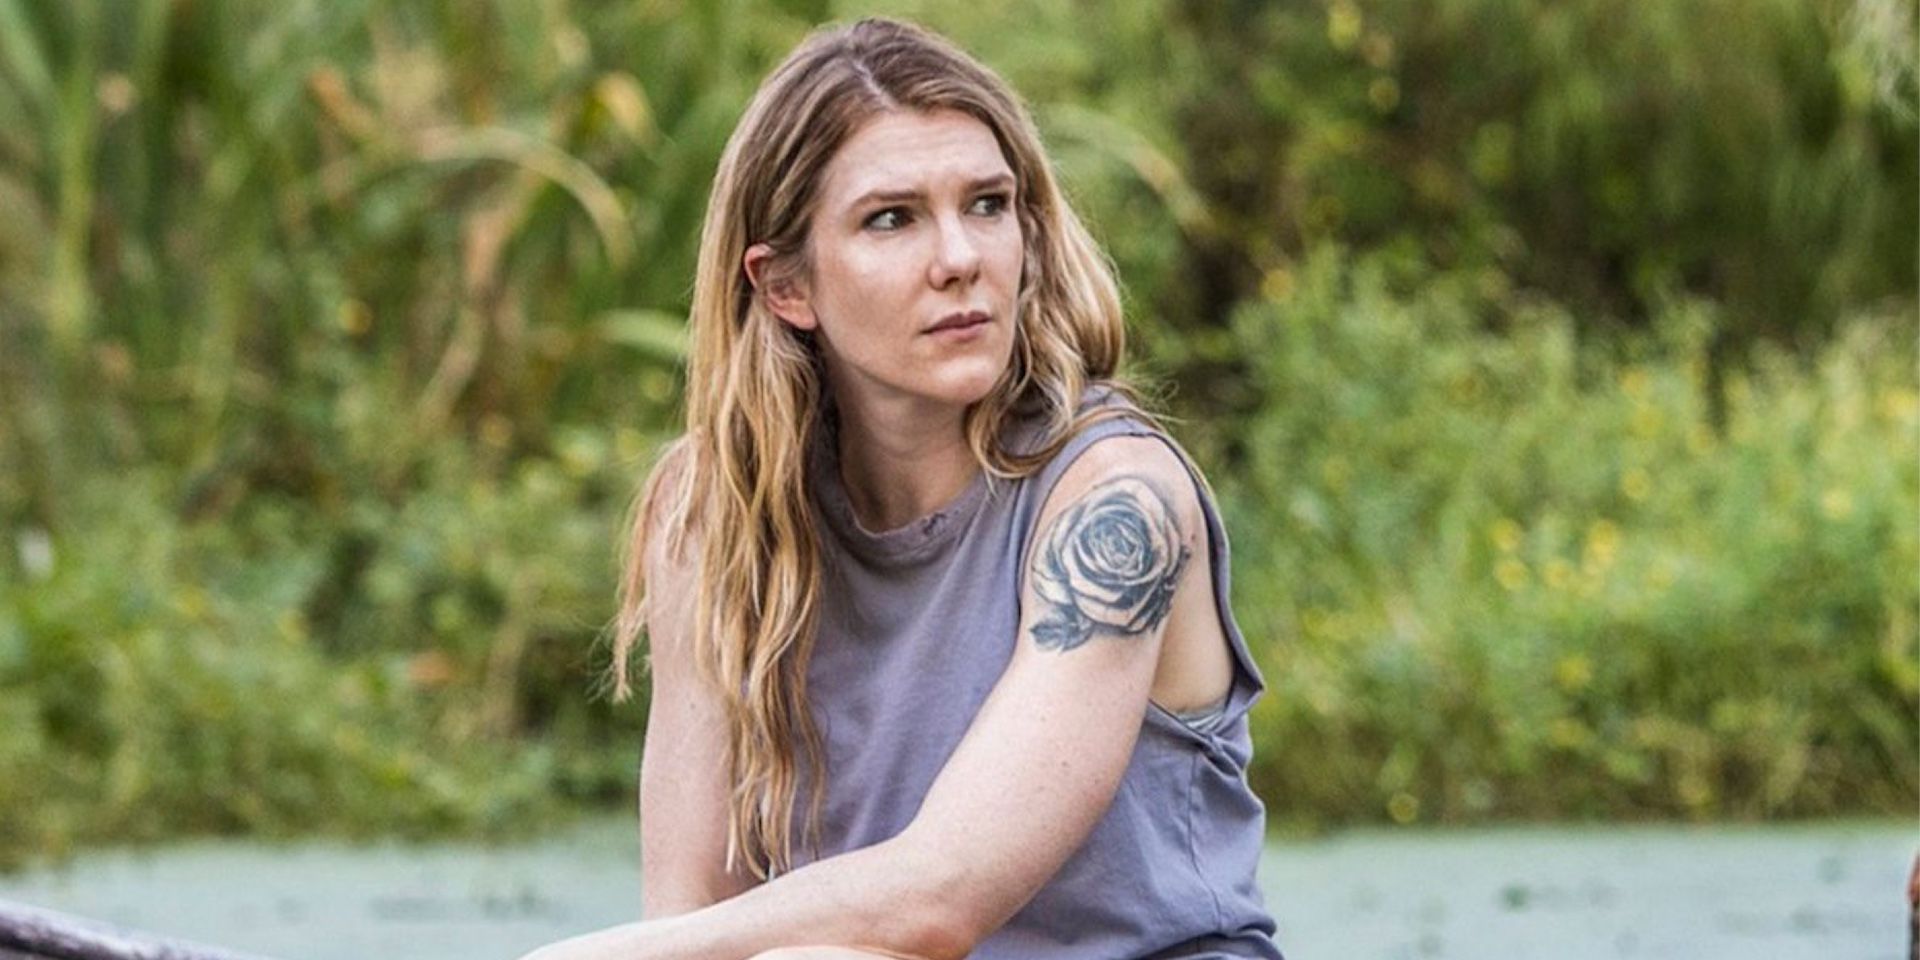 Lily Rabe in Tell Me Your Secrets on Amazon Prime